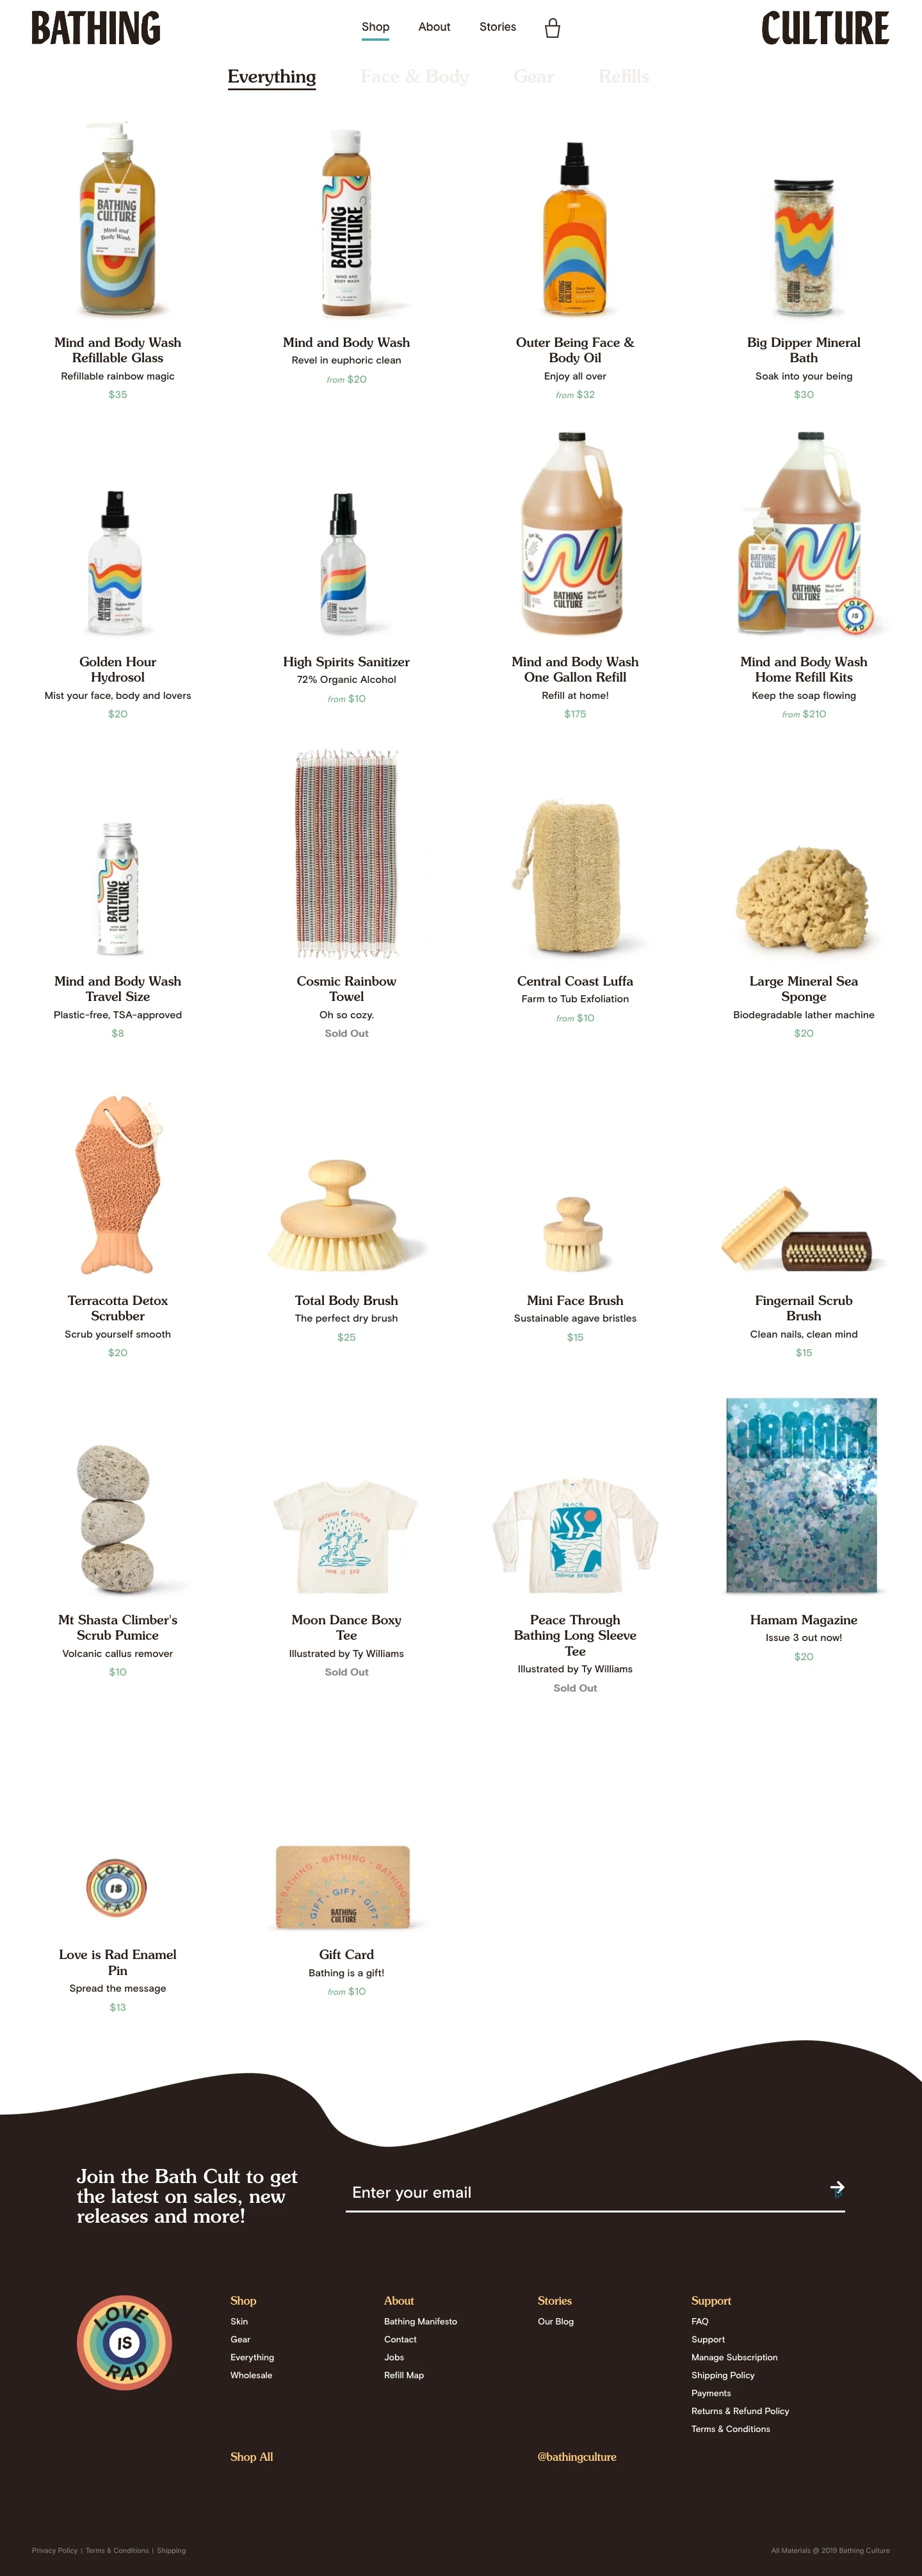 Bathing Culture Landing Page Example: Bathing Culture biodegradable bodywash your natural everyday soap!  Discover radical self care and change the way you approach showers with this organic soap.